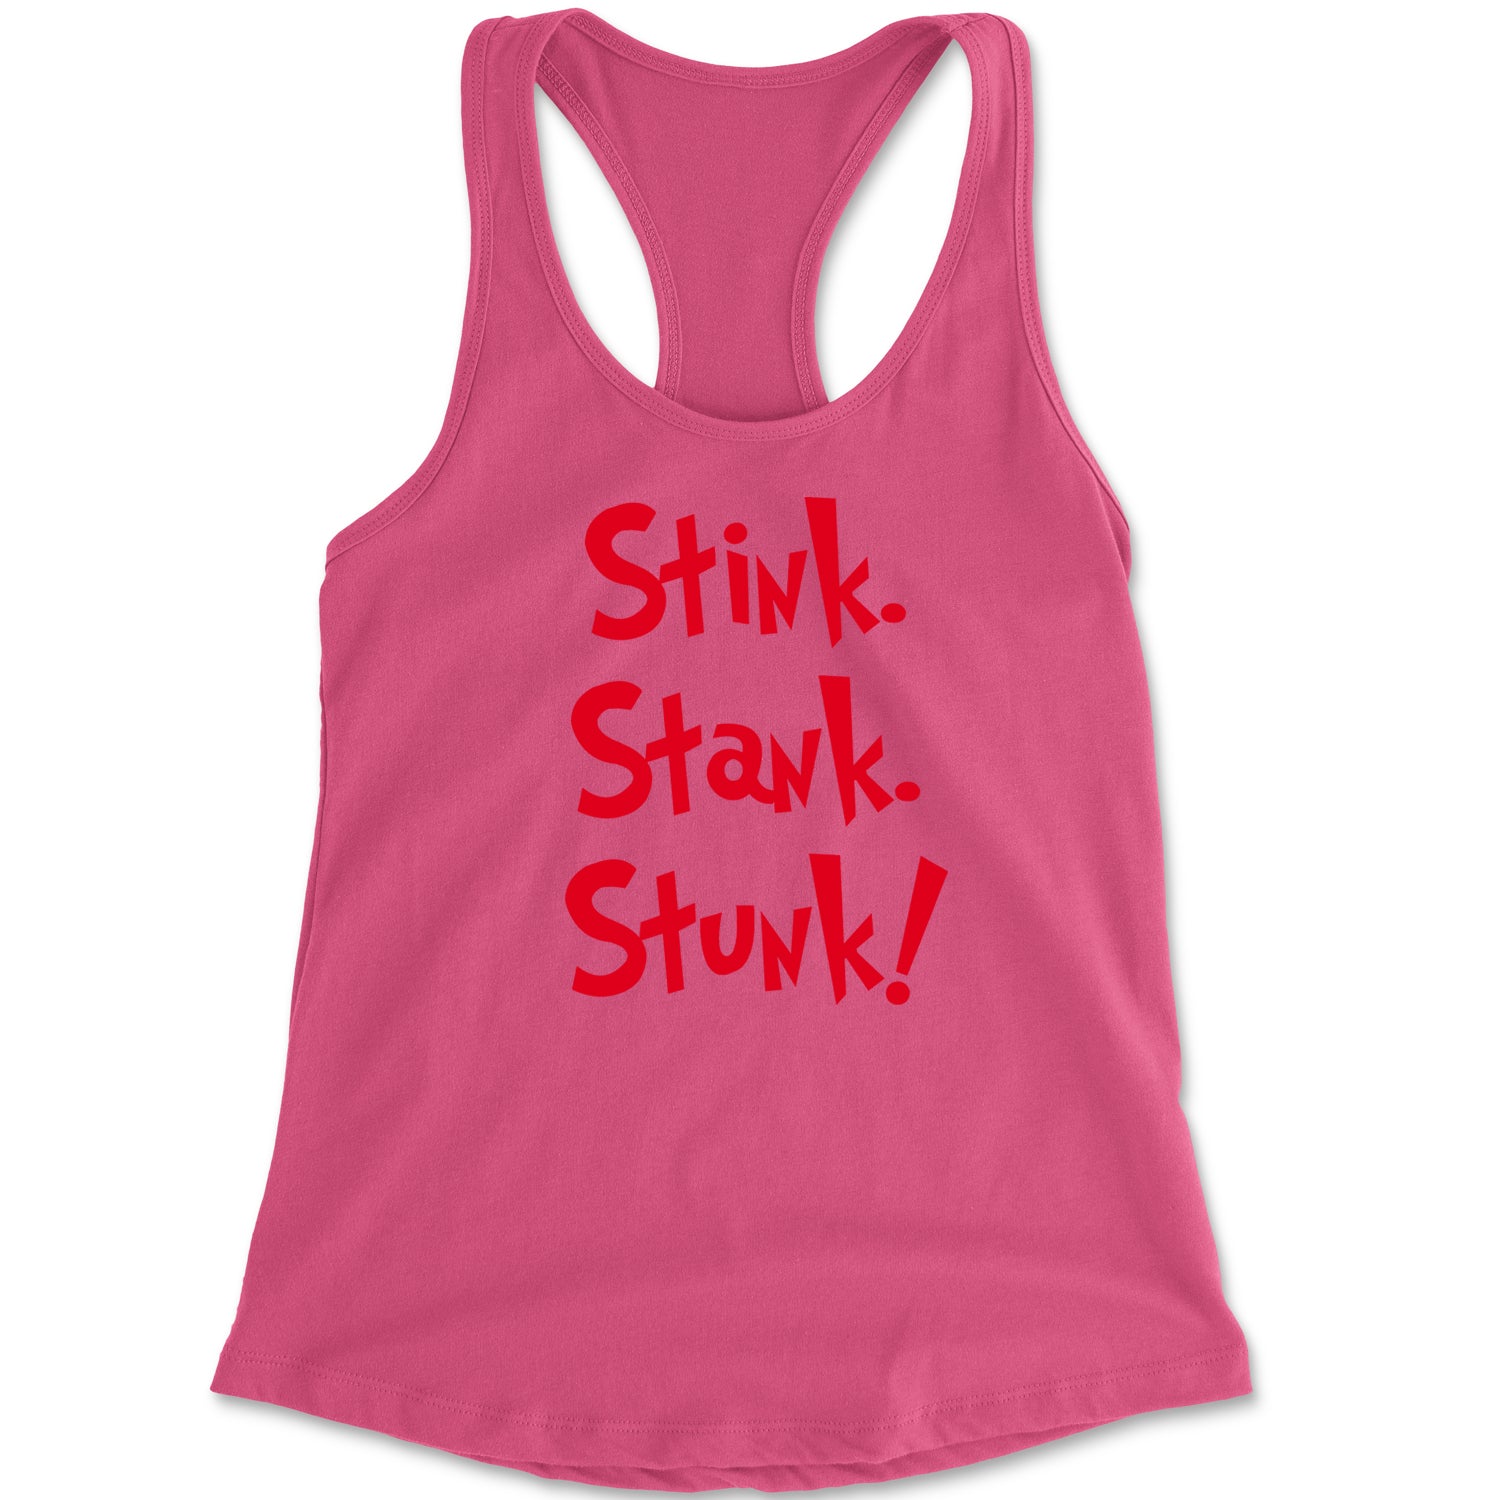 Stink Stank Stunk Grinch Racerback Tank Top for Women christmas, holiday, sweater, ugly, xmas by Expression Tees